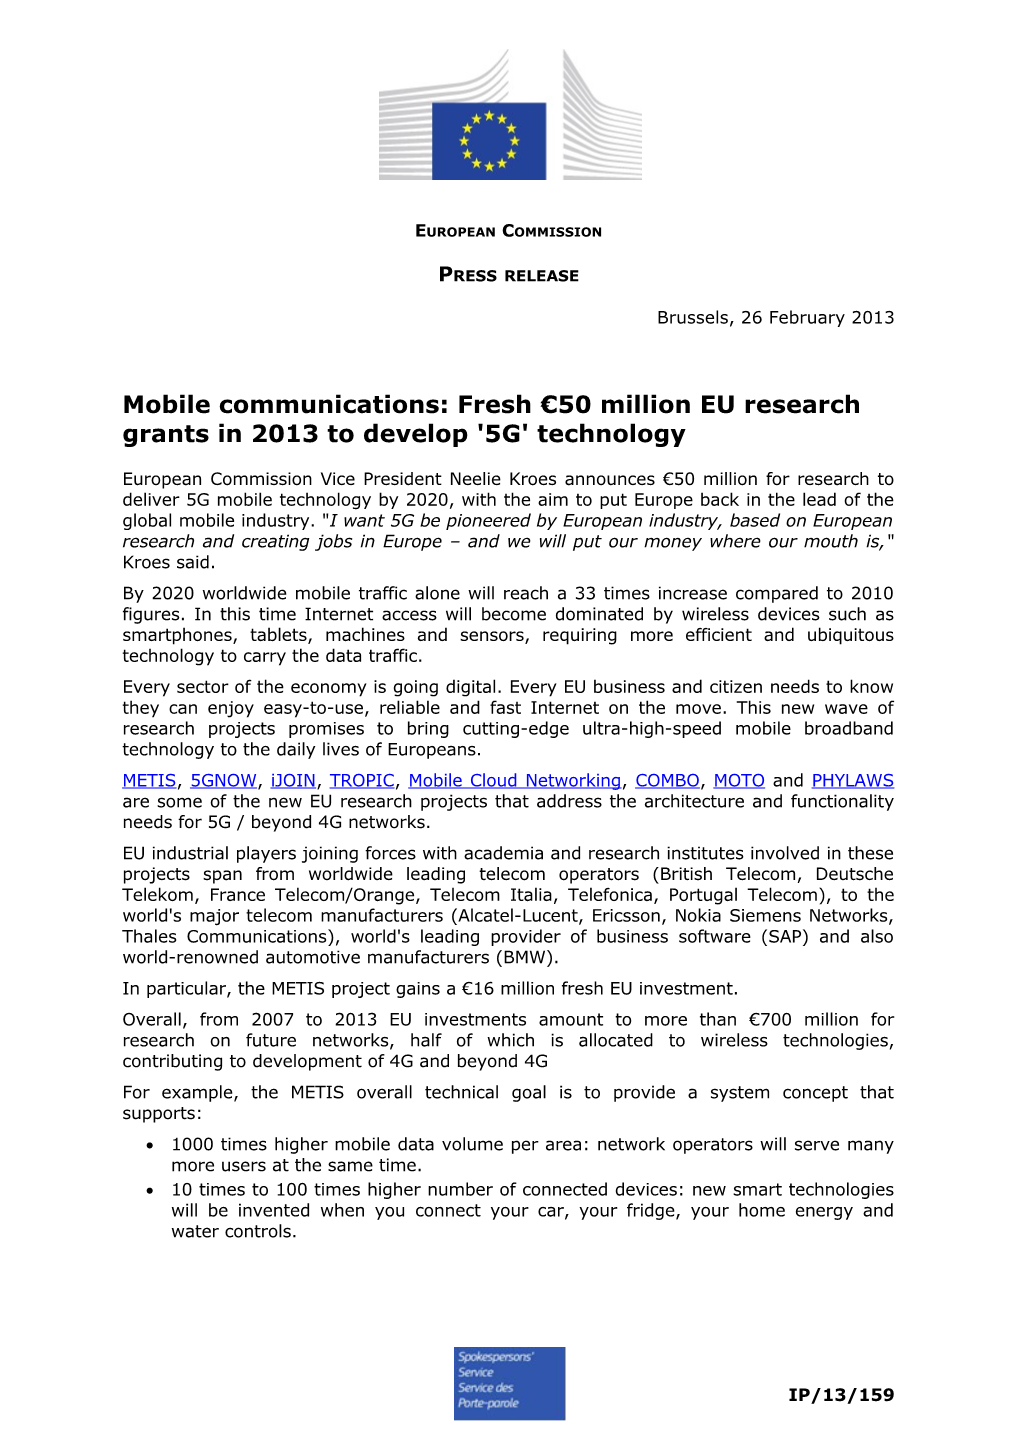 Mobile Communications: Fresh 50 Million EU Research Grants in 2013 to Develop '5G' Technology